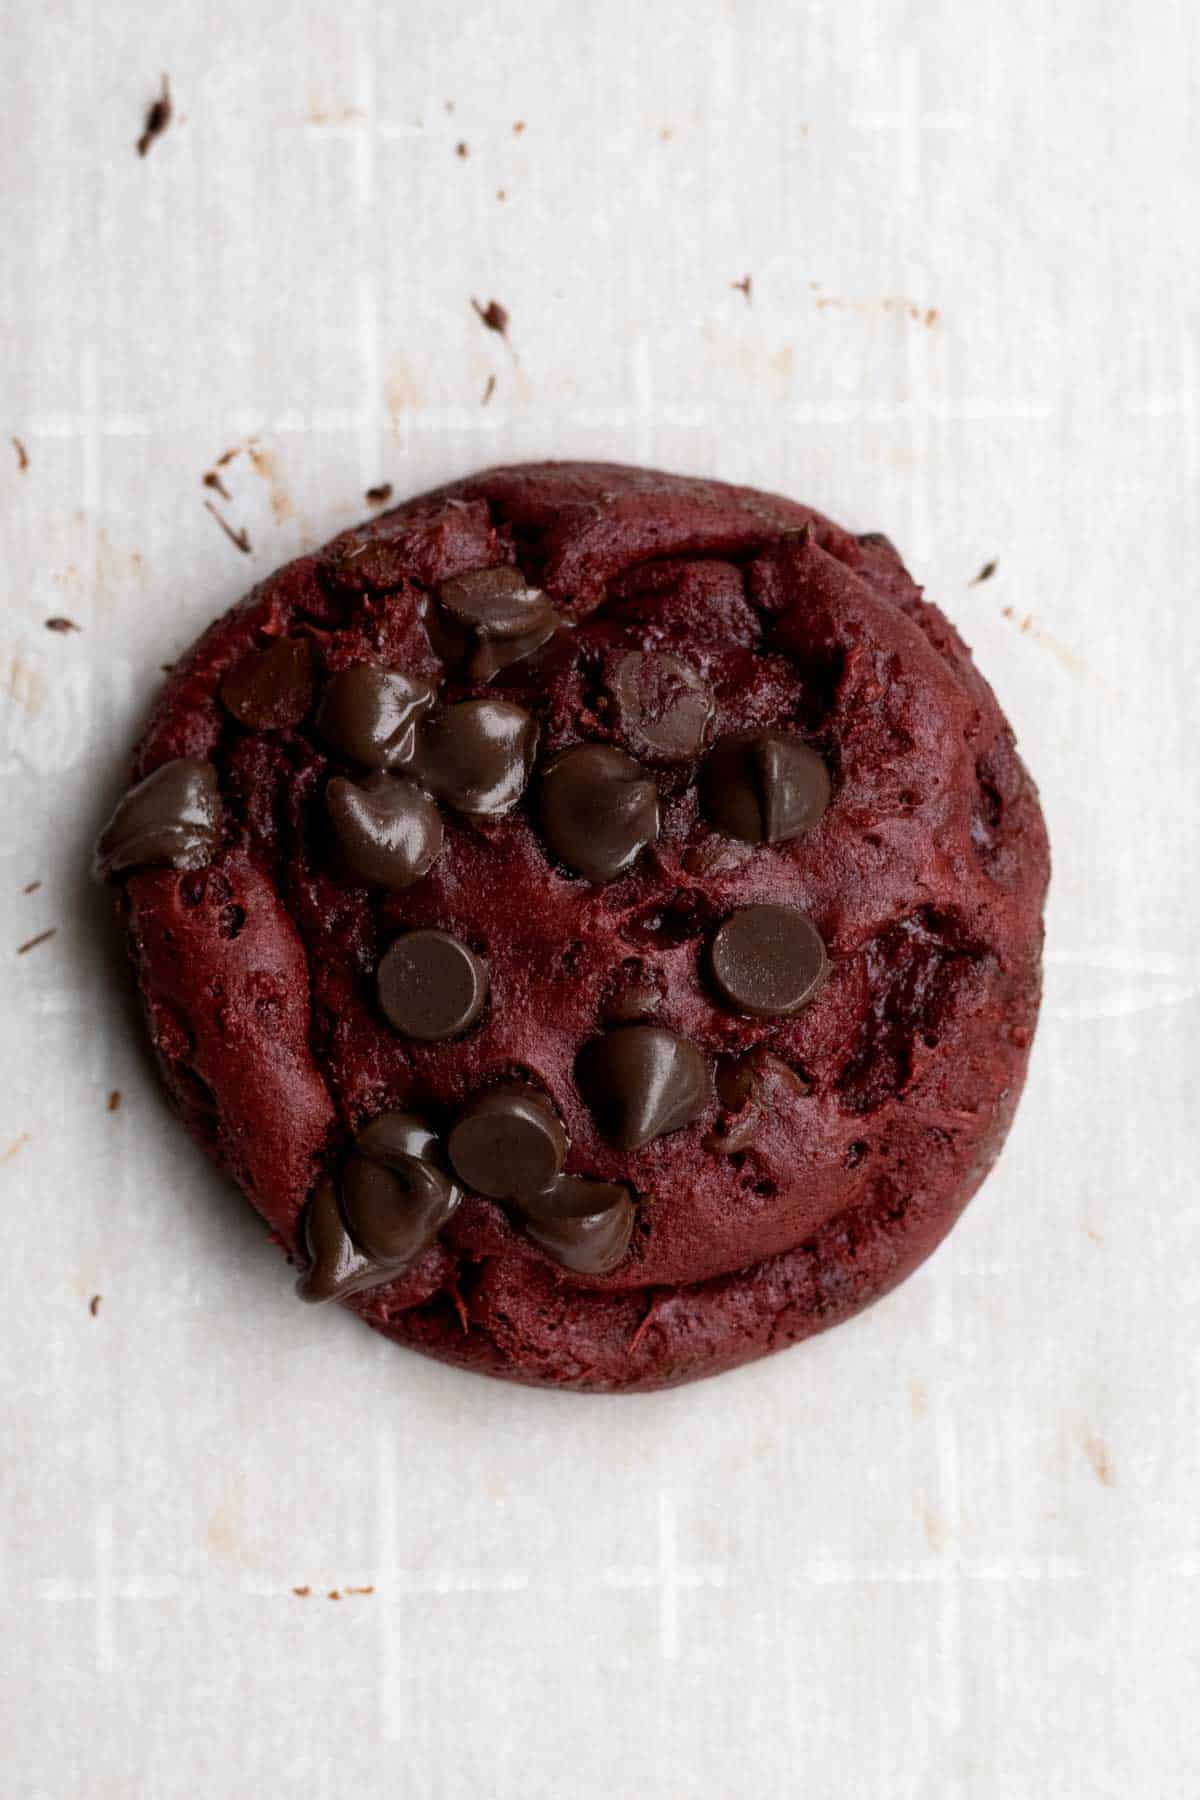 A hot cookie with melted chocolate chips on wax paper.